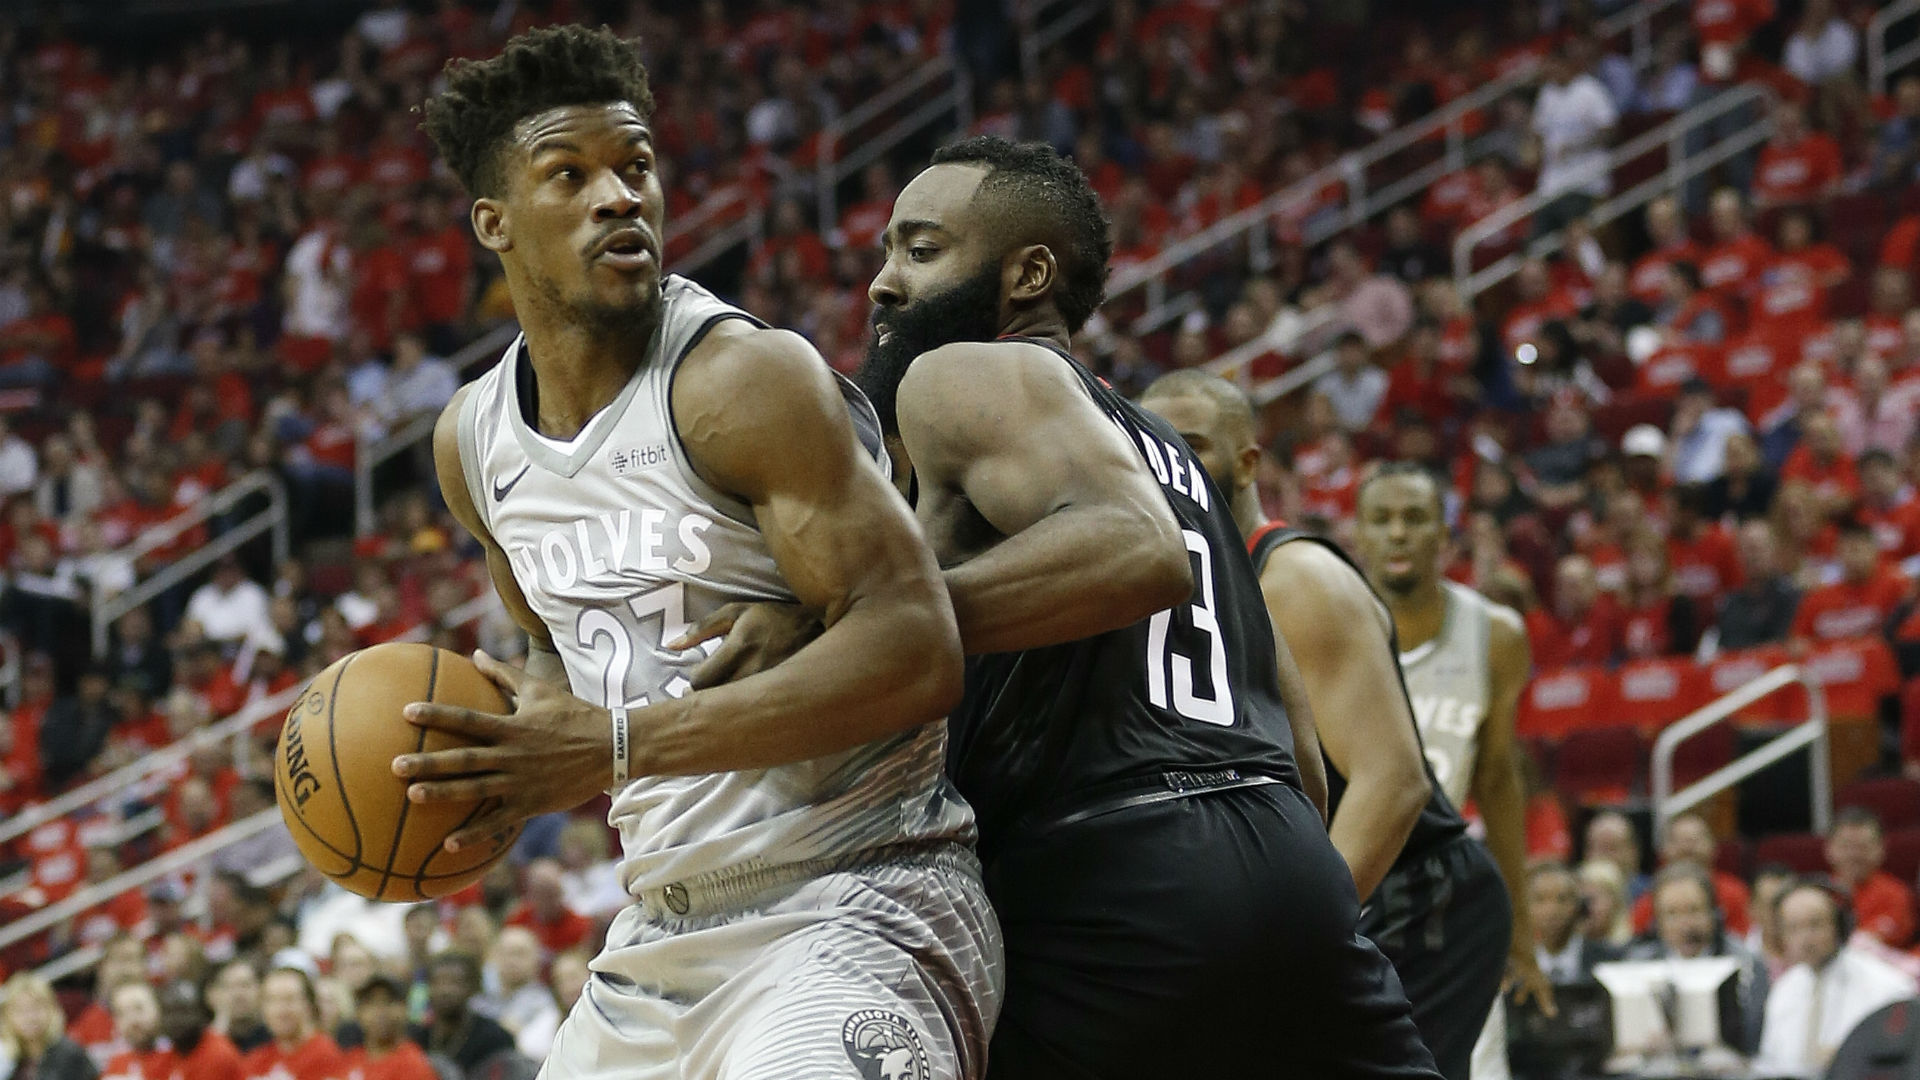 NBA trade rumors: Should Rockets go all-in on Jimmy Butler? | NBA | Sporting News